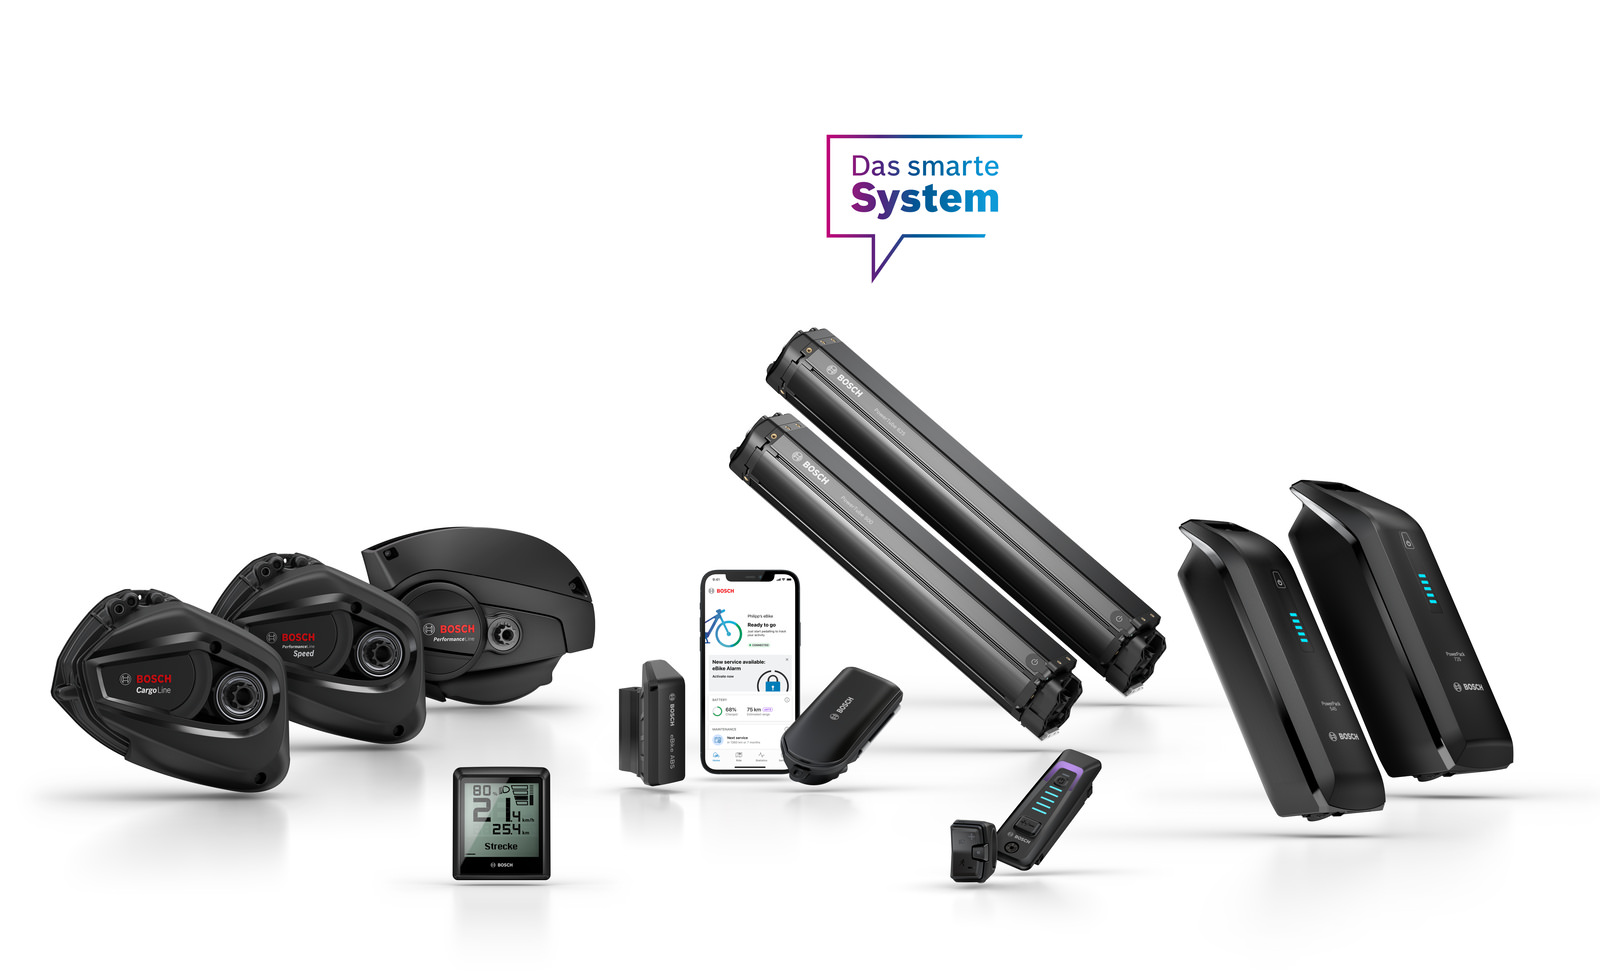 The Bosch Smart System family is expanding – new hardware and